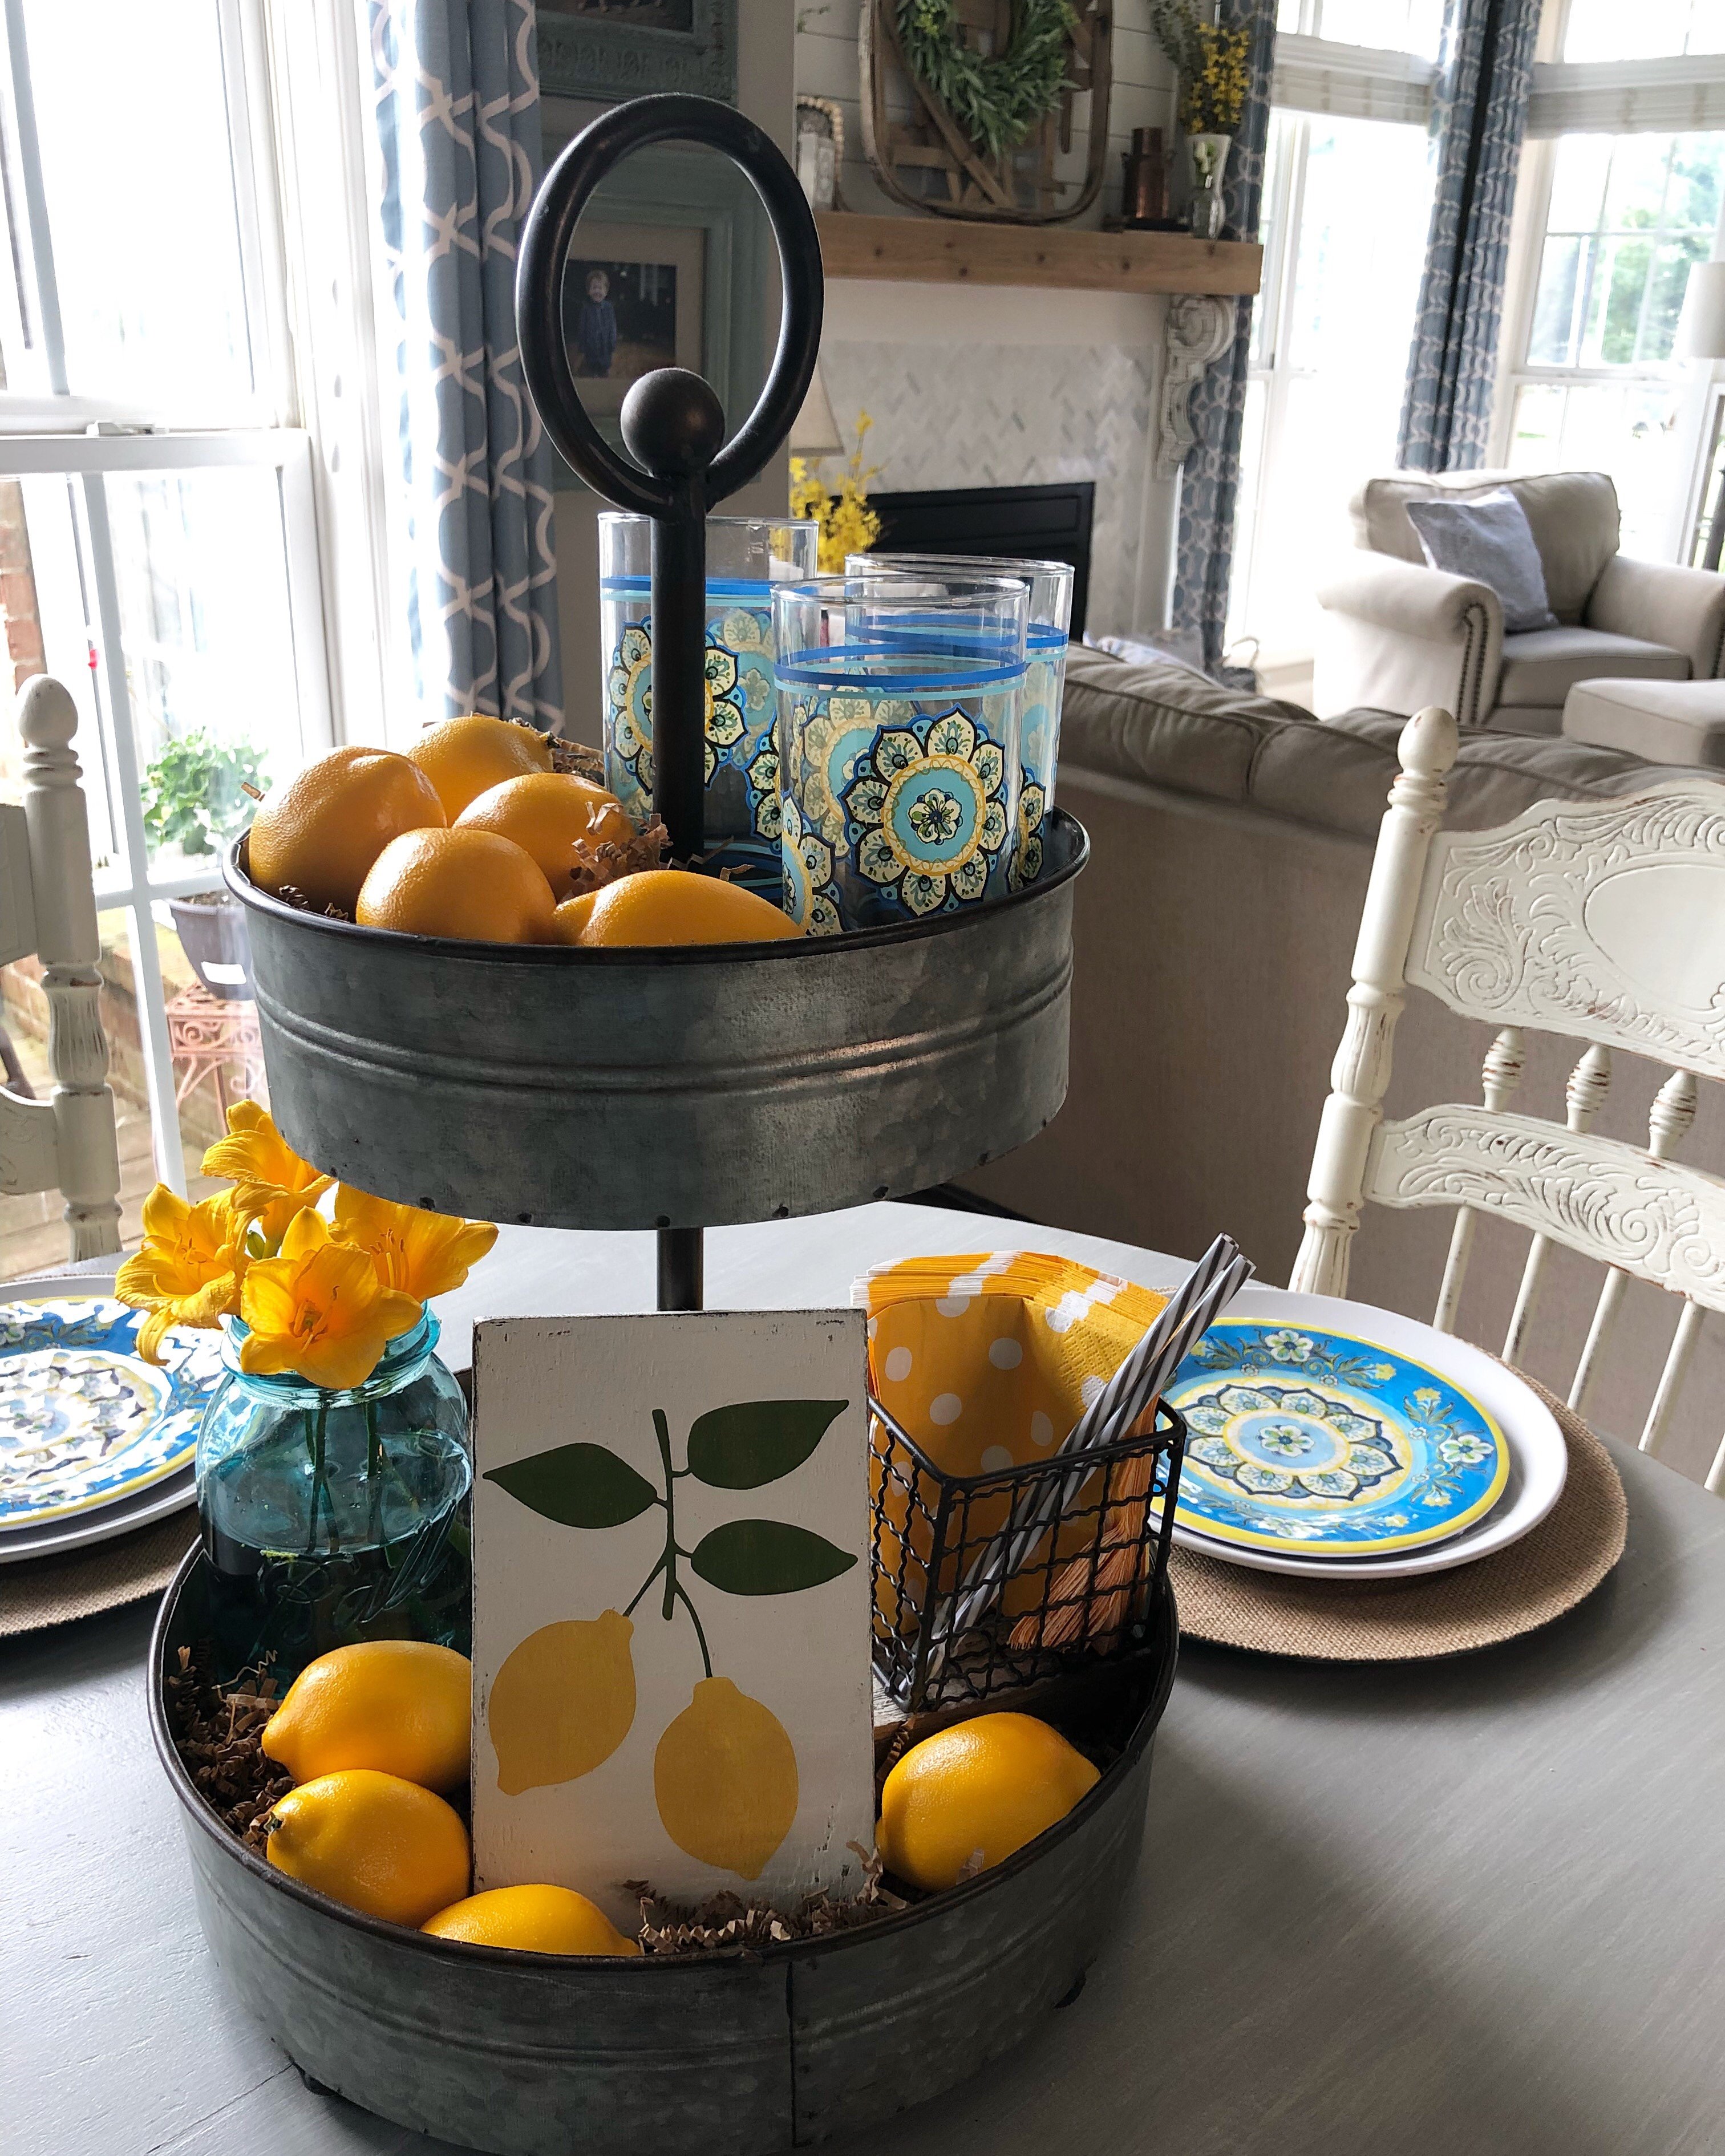 My lemon inspired Summer Tiered Tray! How to pick a theme and run with it!